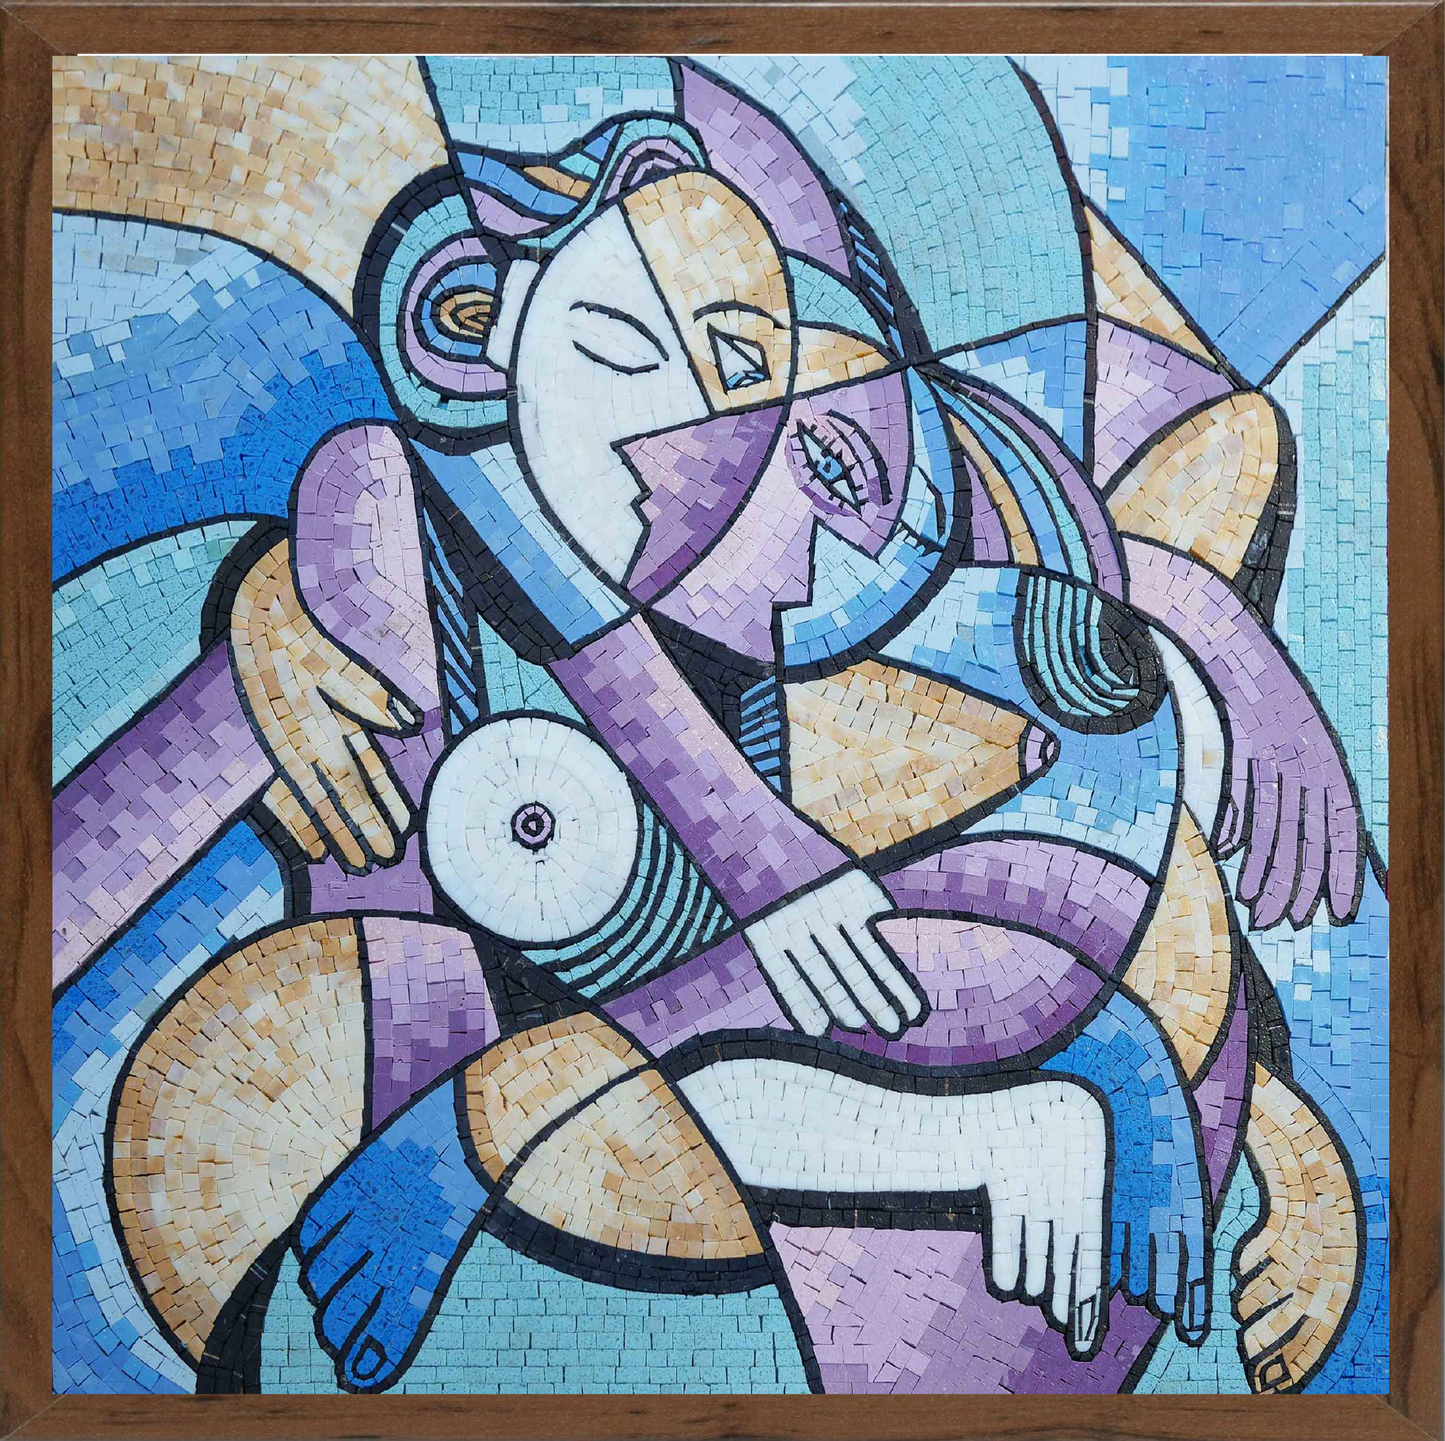 anthony fablos's "endless love" - mosaic reproduction